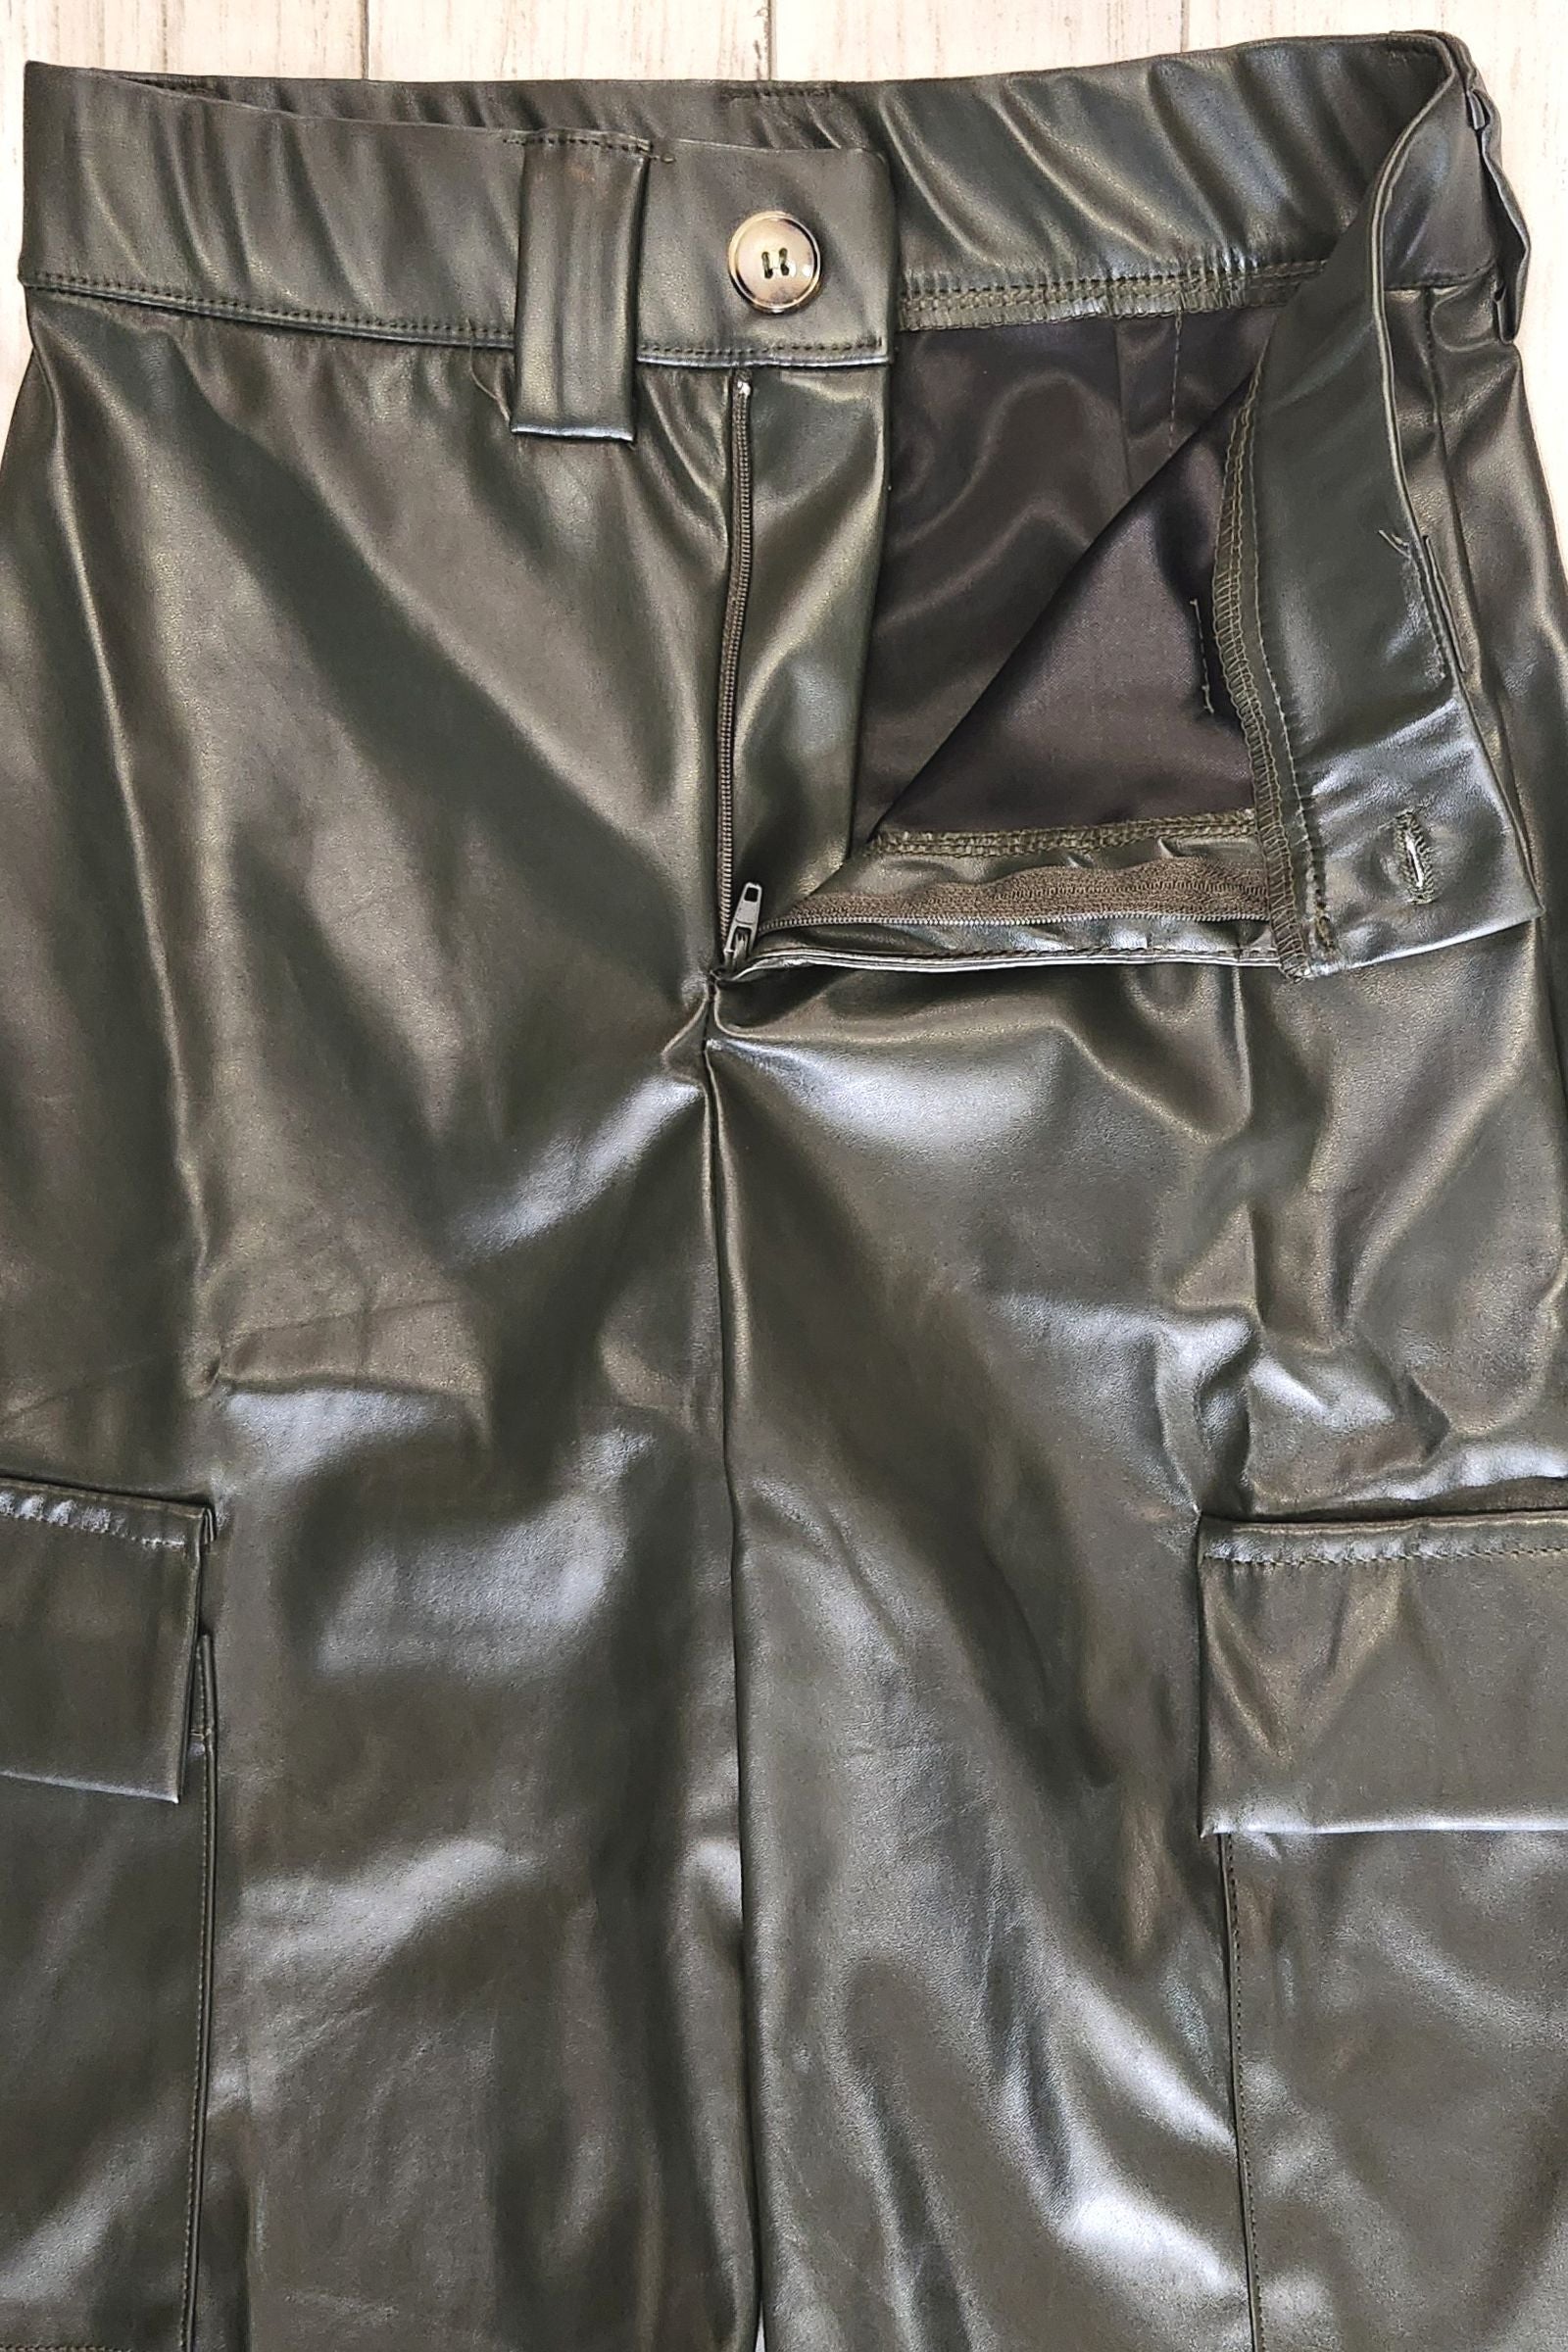 Olive Pleather Ankle Pants